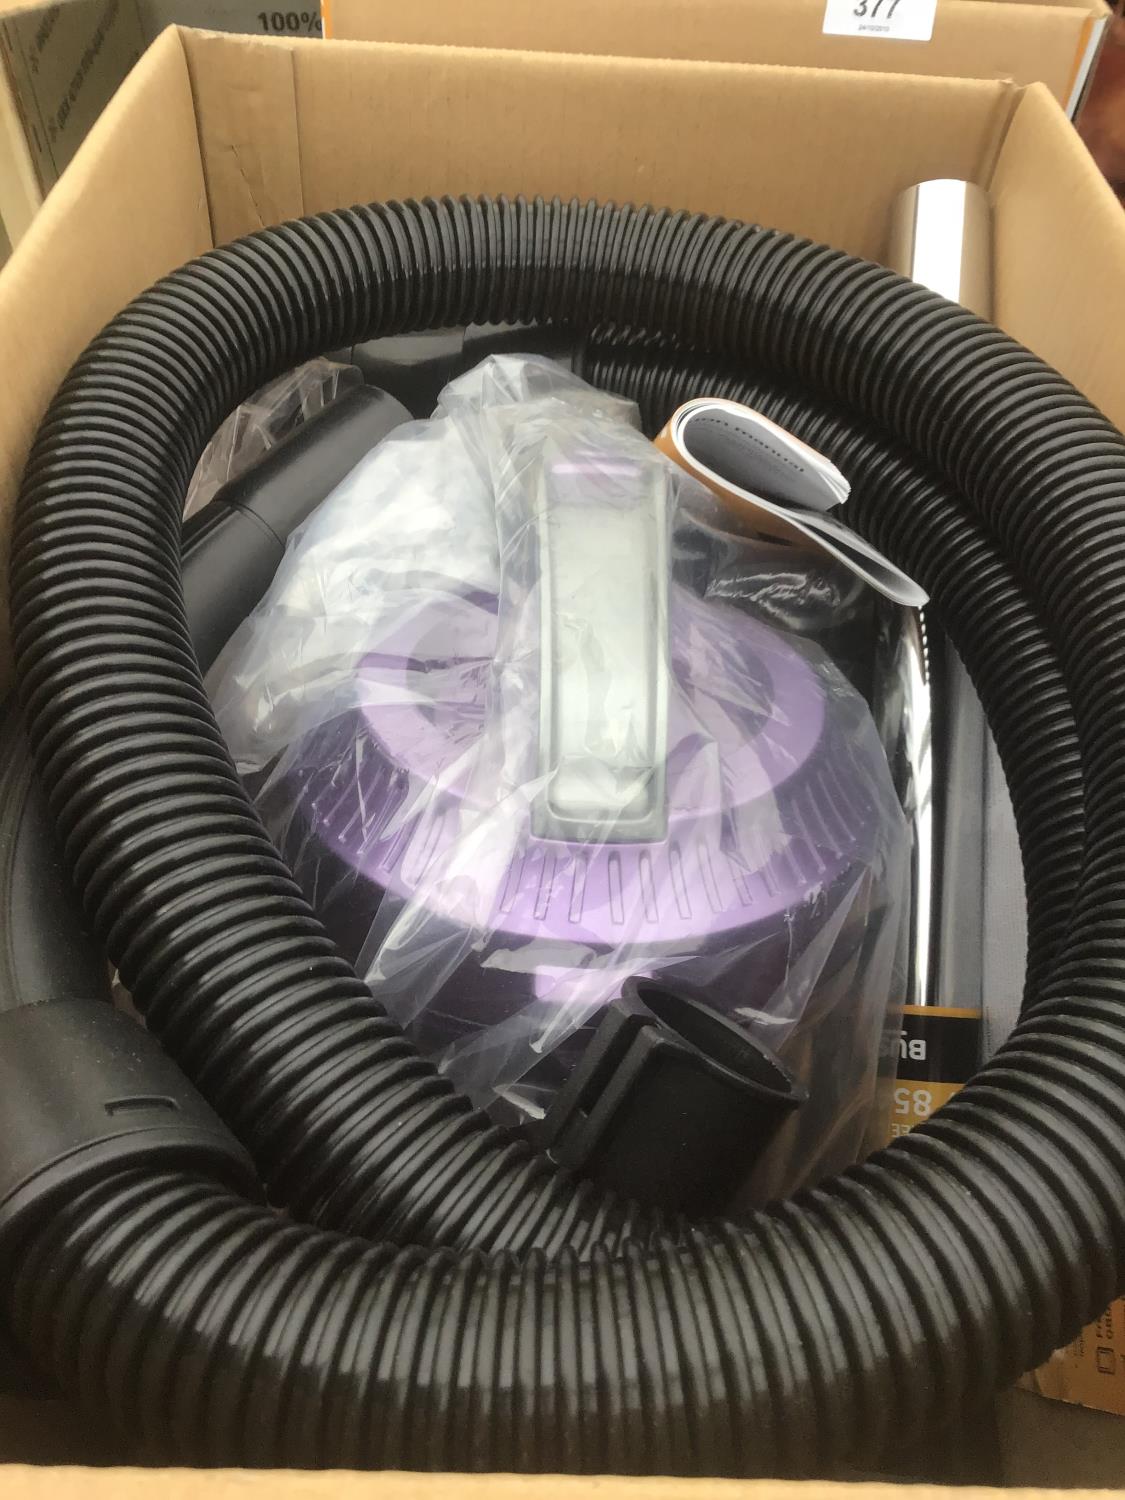 A BOXED BUSH BAGLESS CYLINDER VACUUM CLEANER IN WORKING ORDER - Image 2 of 2